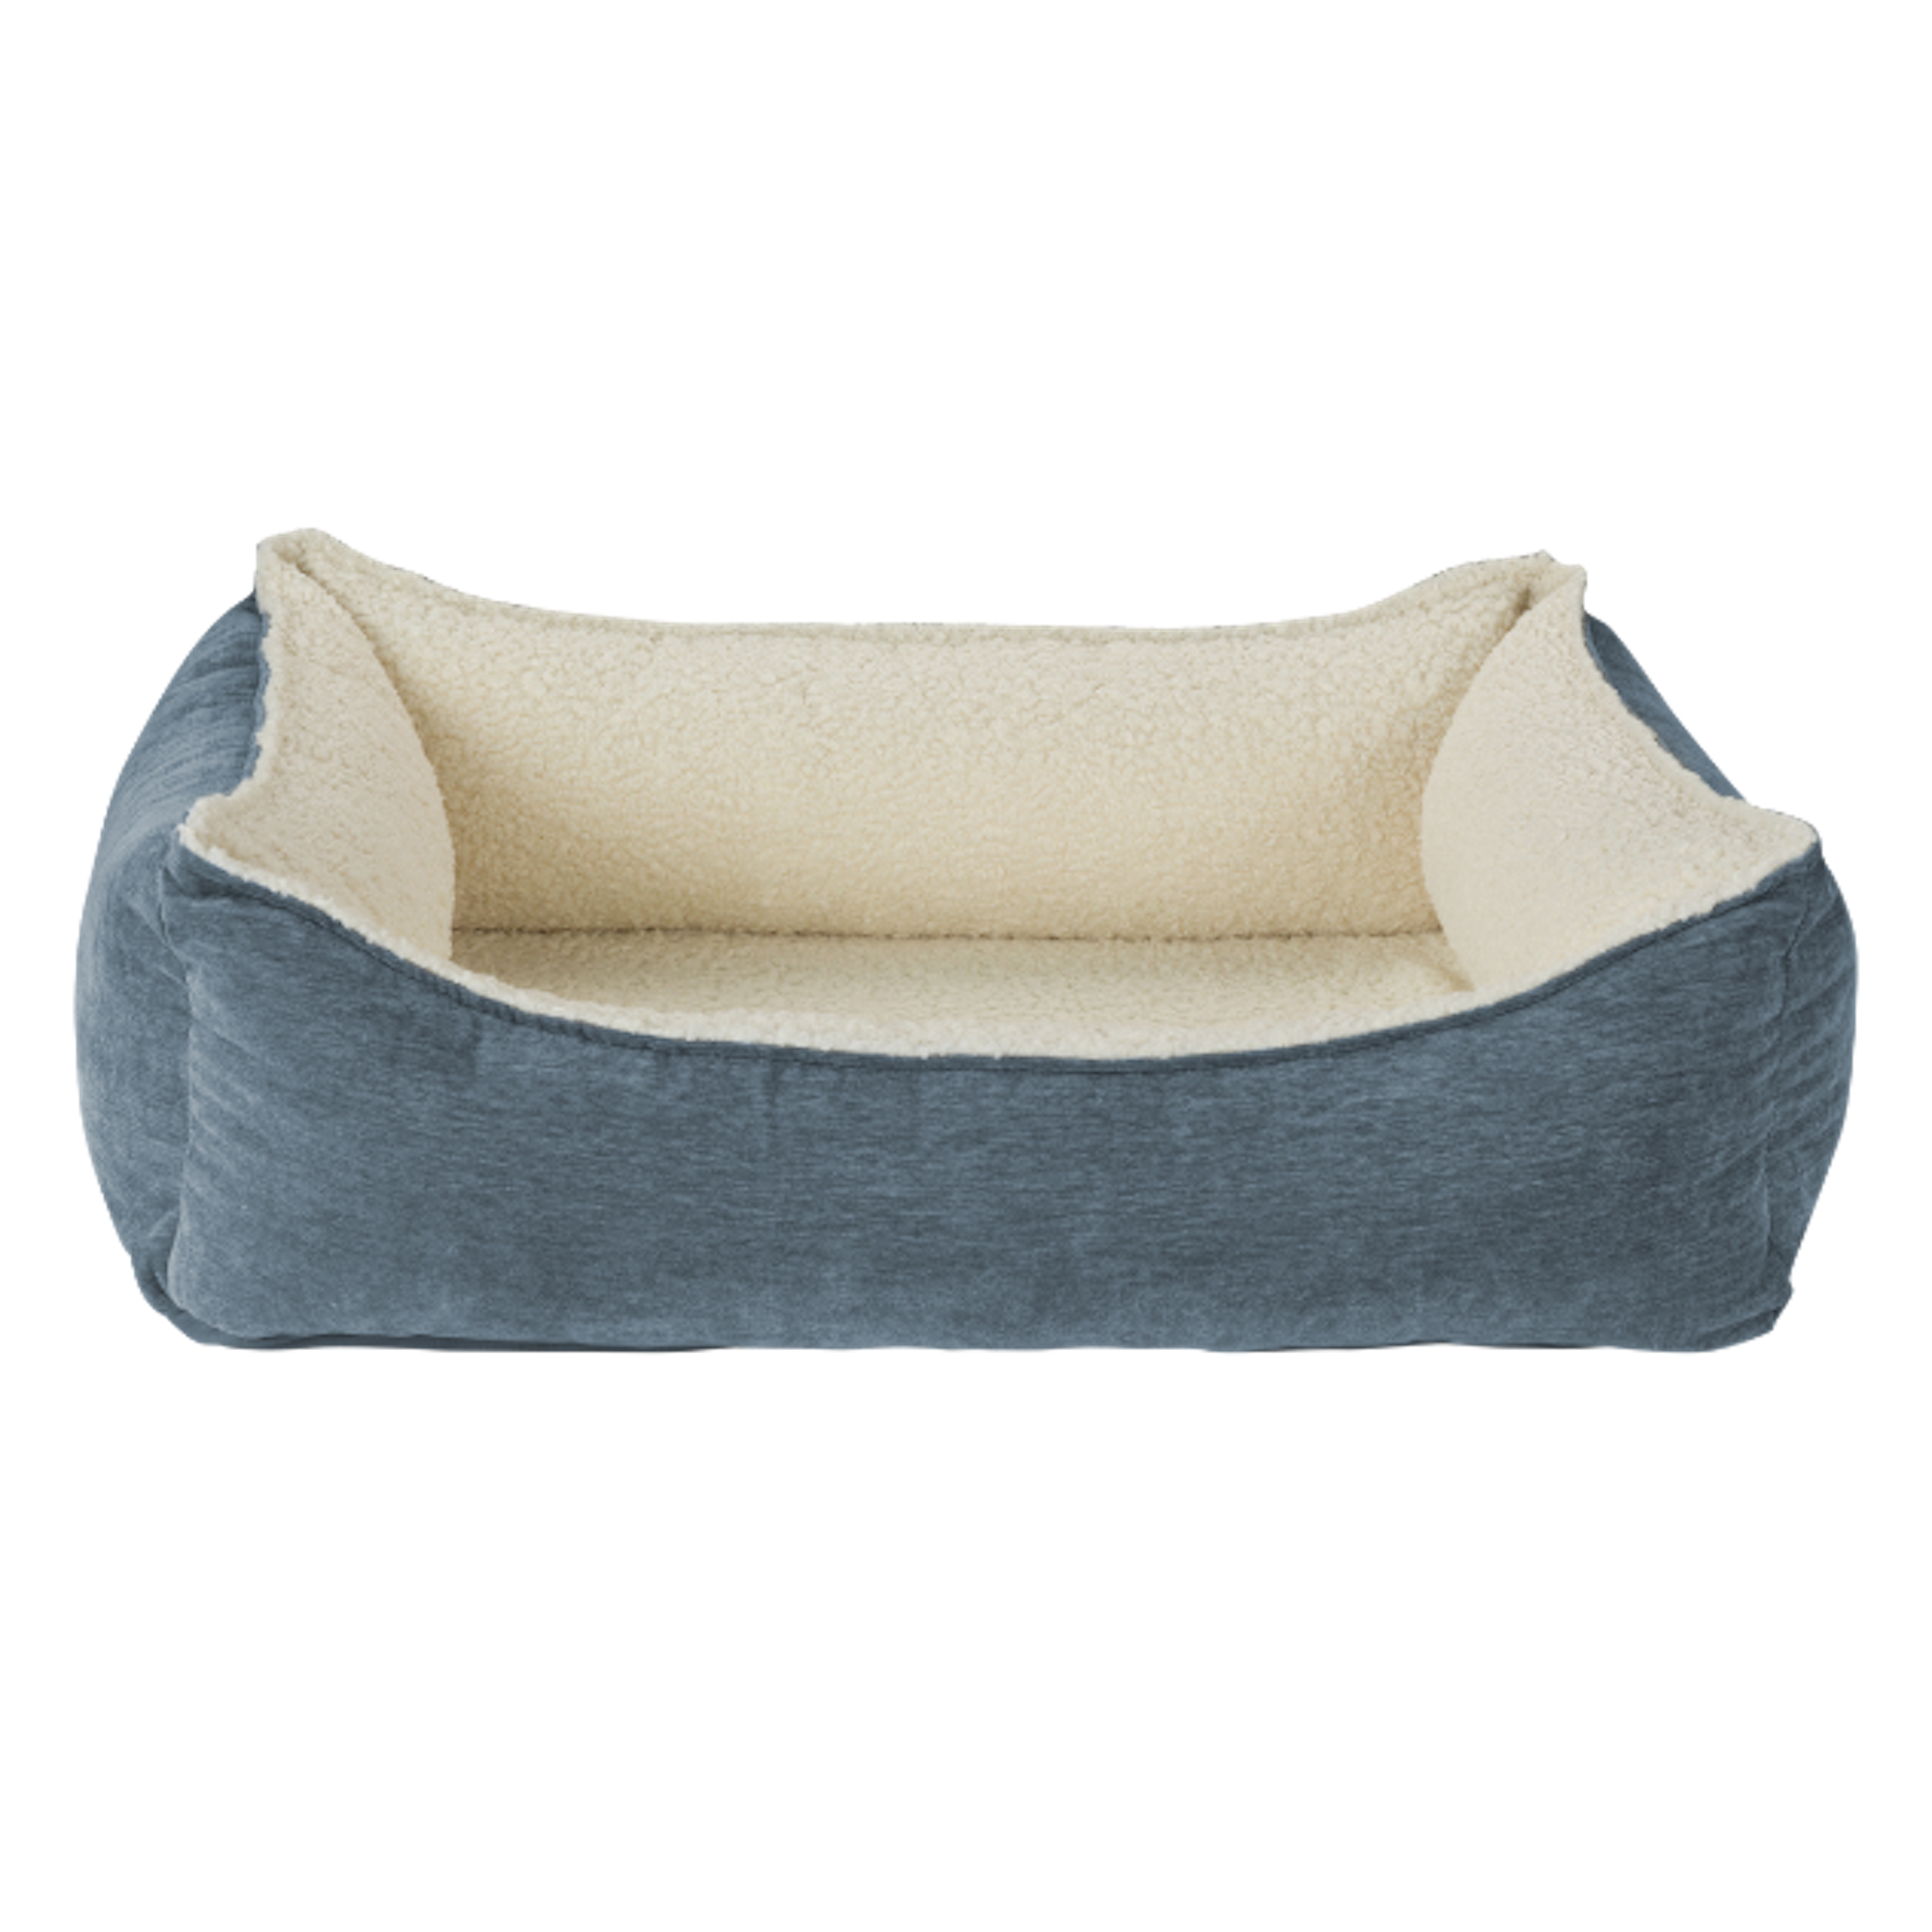 MINERAL-OSLO-ORTHO-BOLSTER-DOG-BED